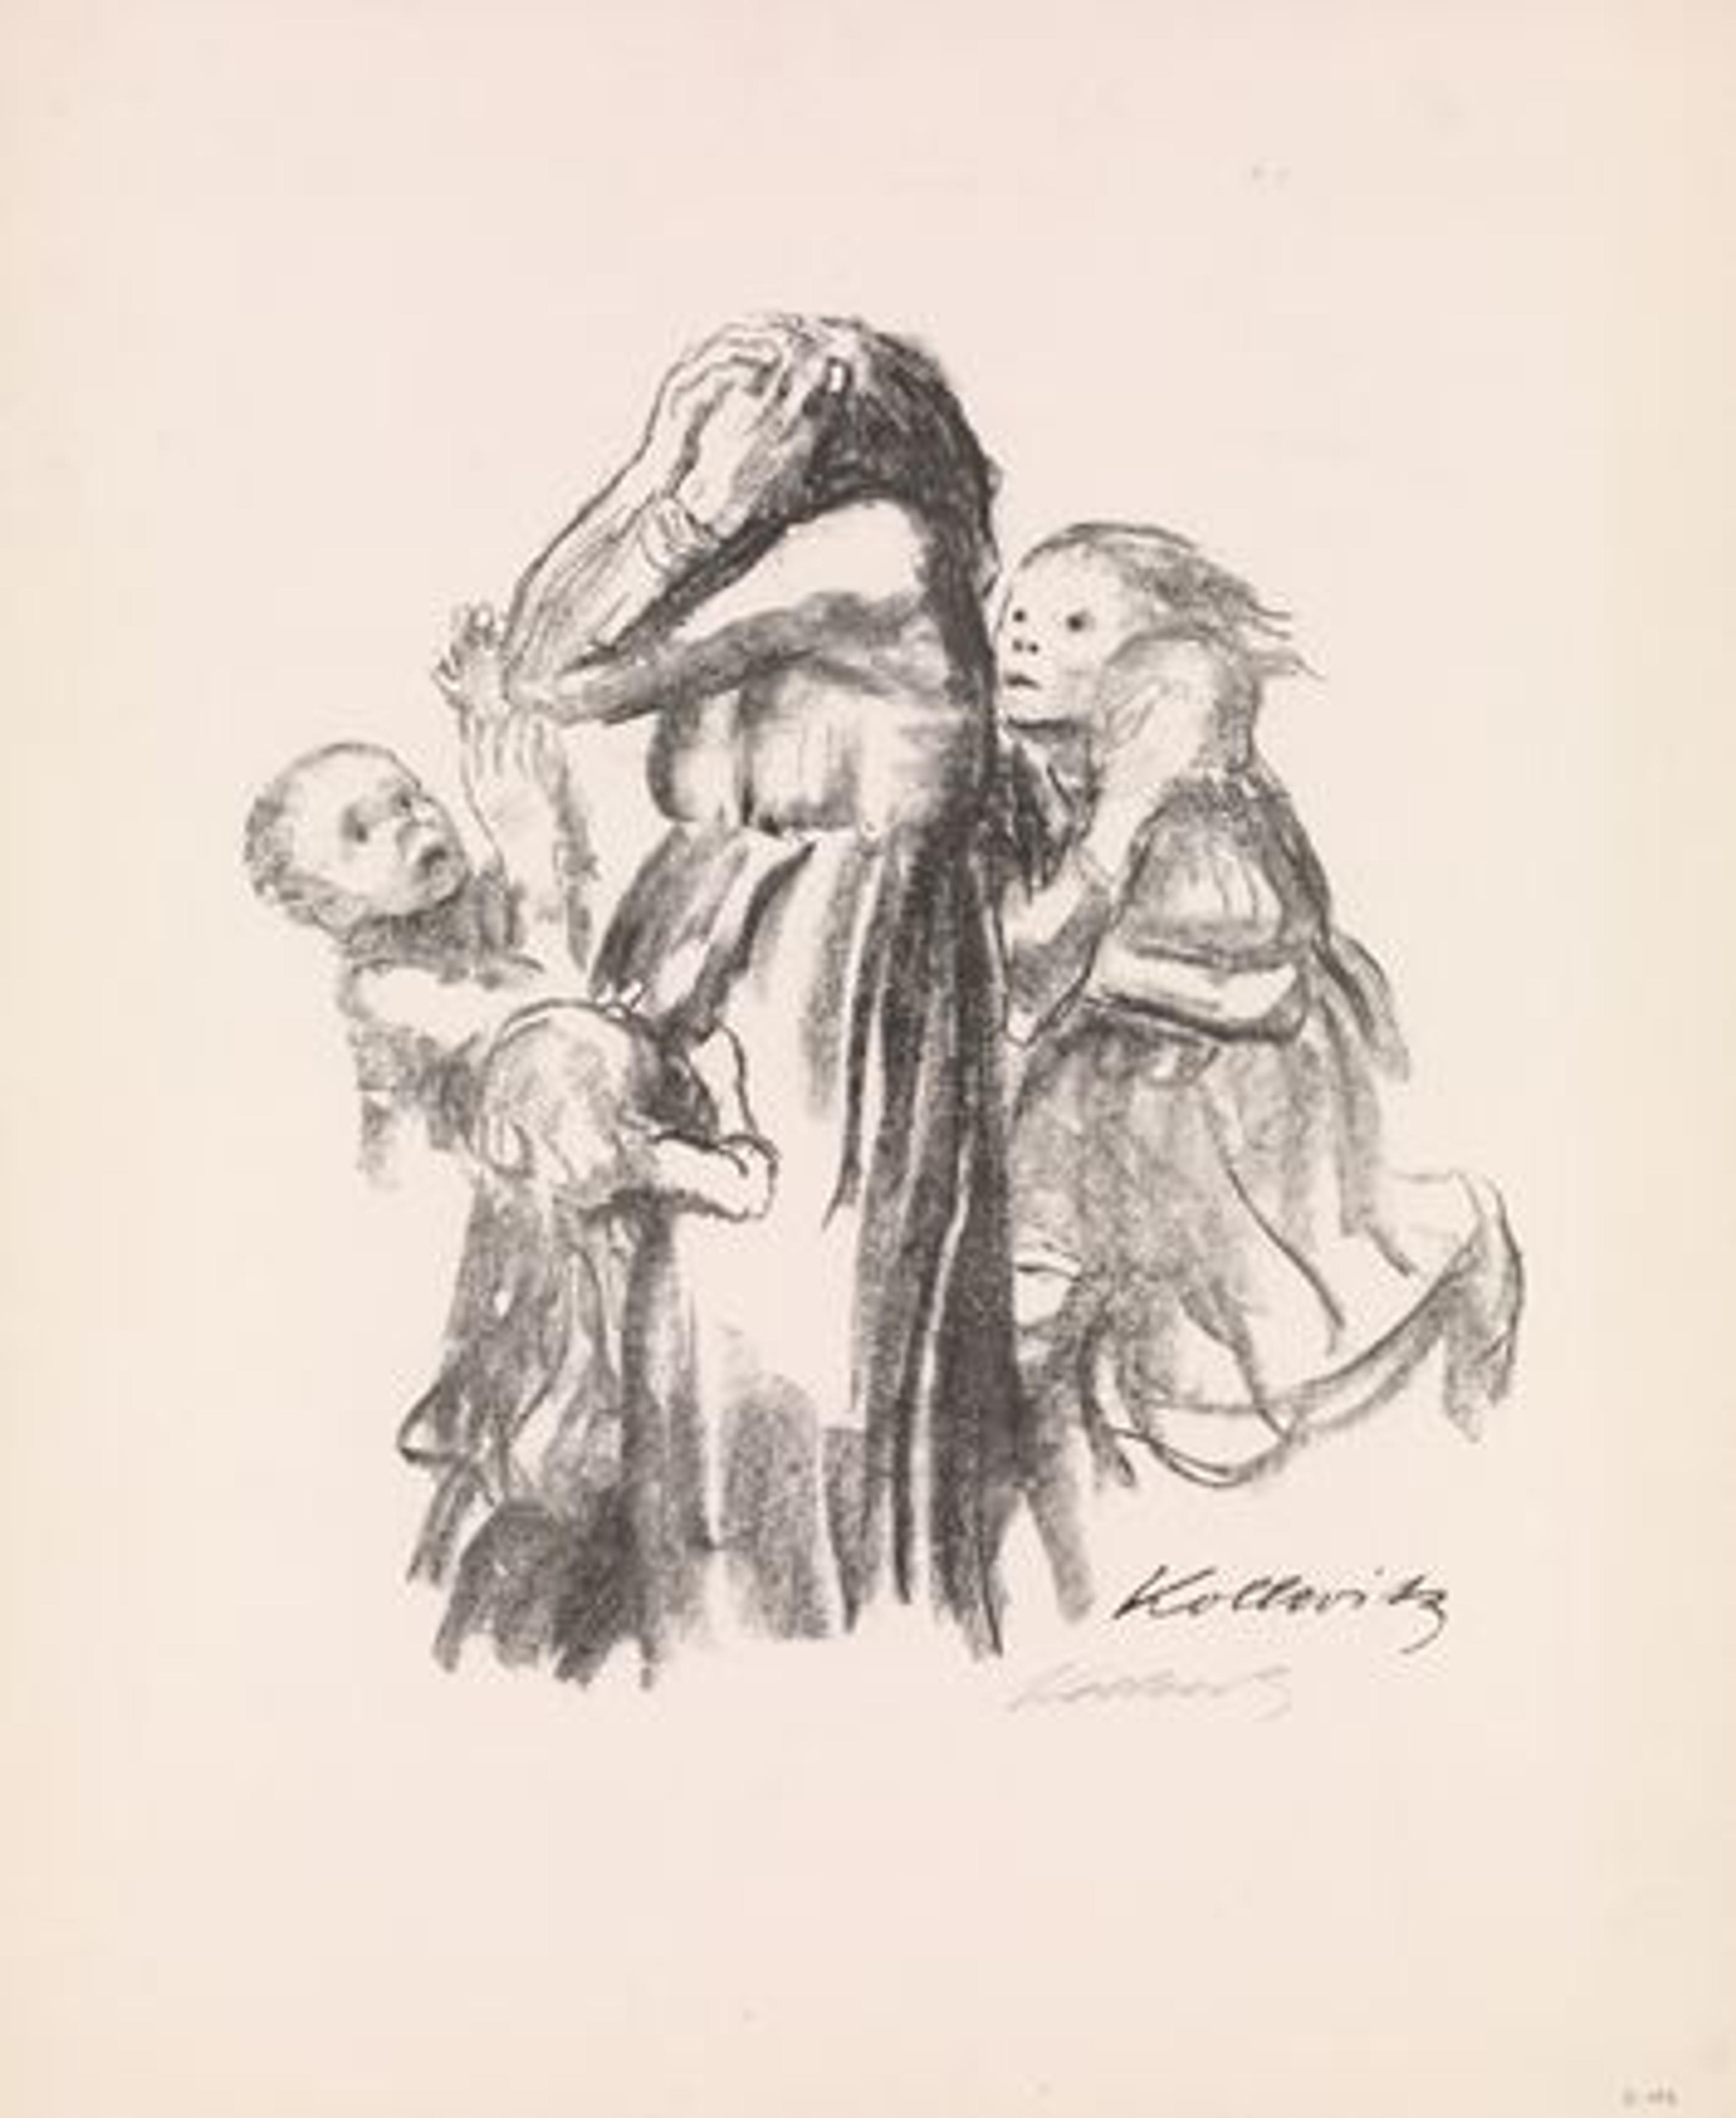 Käthe Kollwitz's 'Killed in Action (Gefallen)' showing a grief-stricken mother surrounded by a group of children